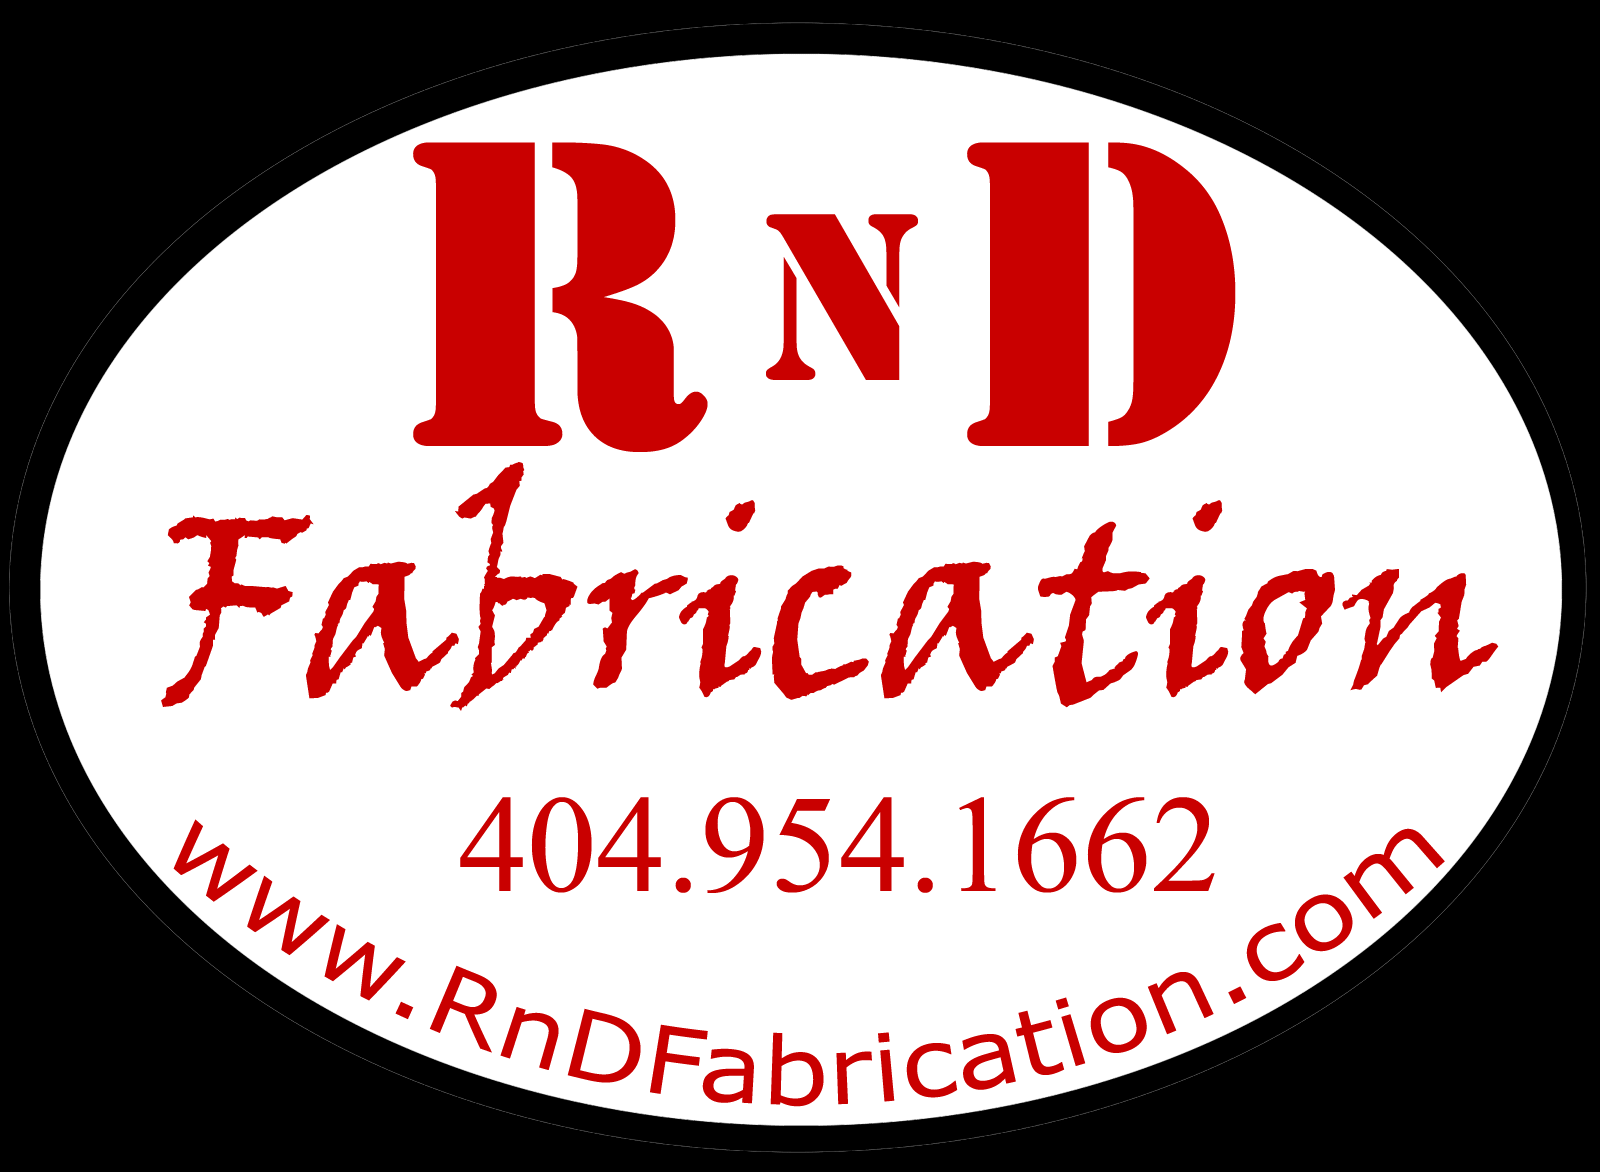 RnD Fabrication, providing Radiator, Valve Covers and more for Project Sabre